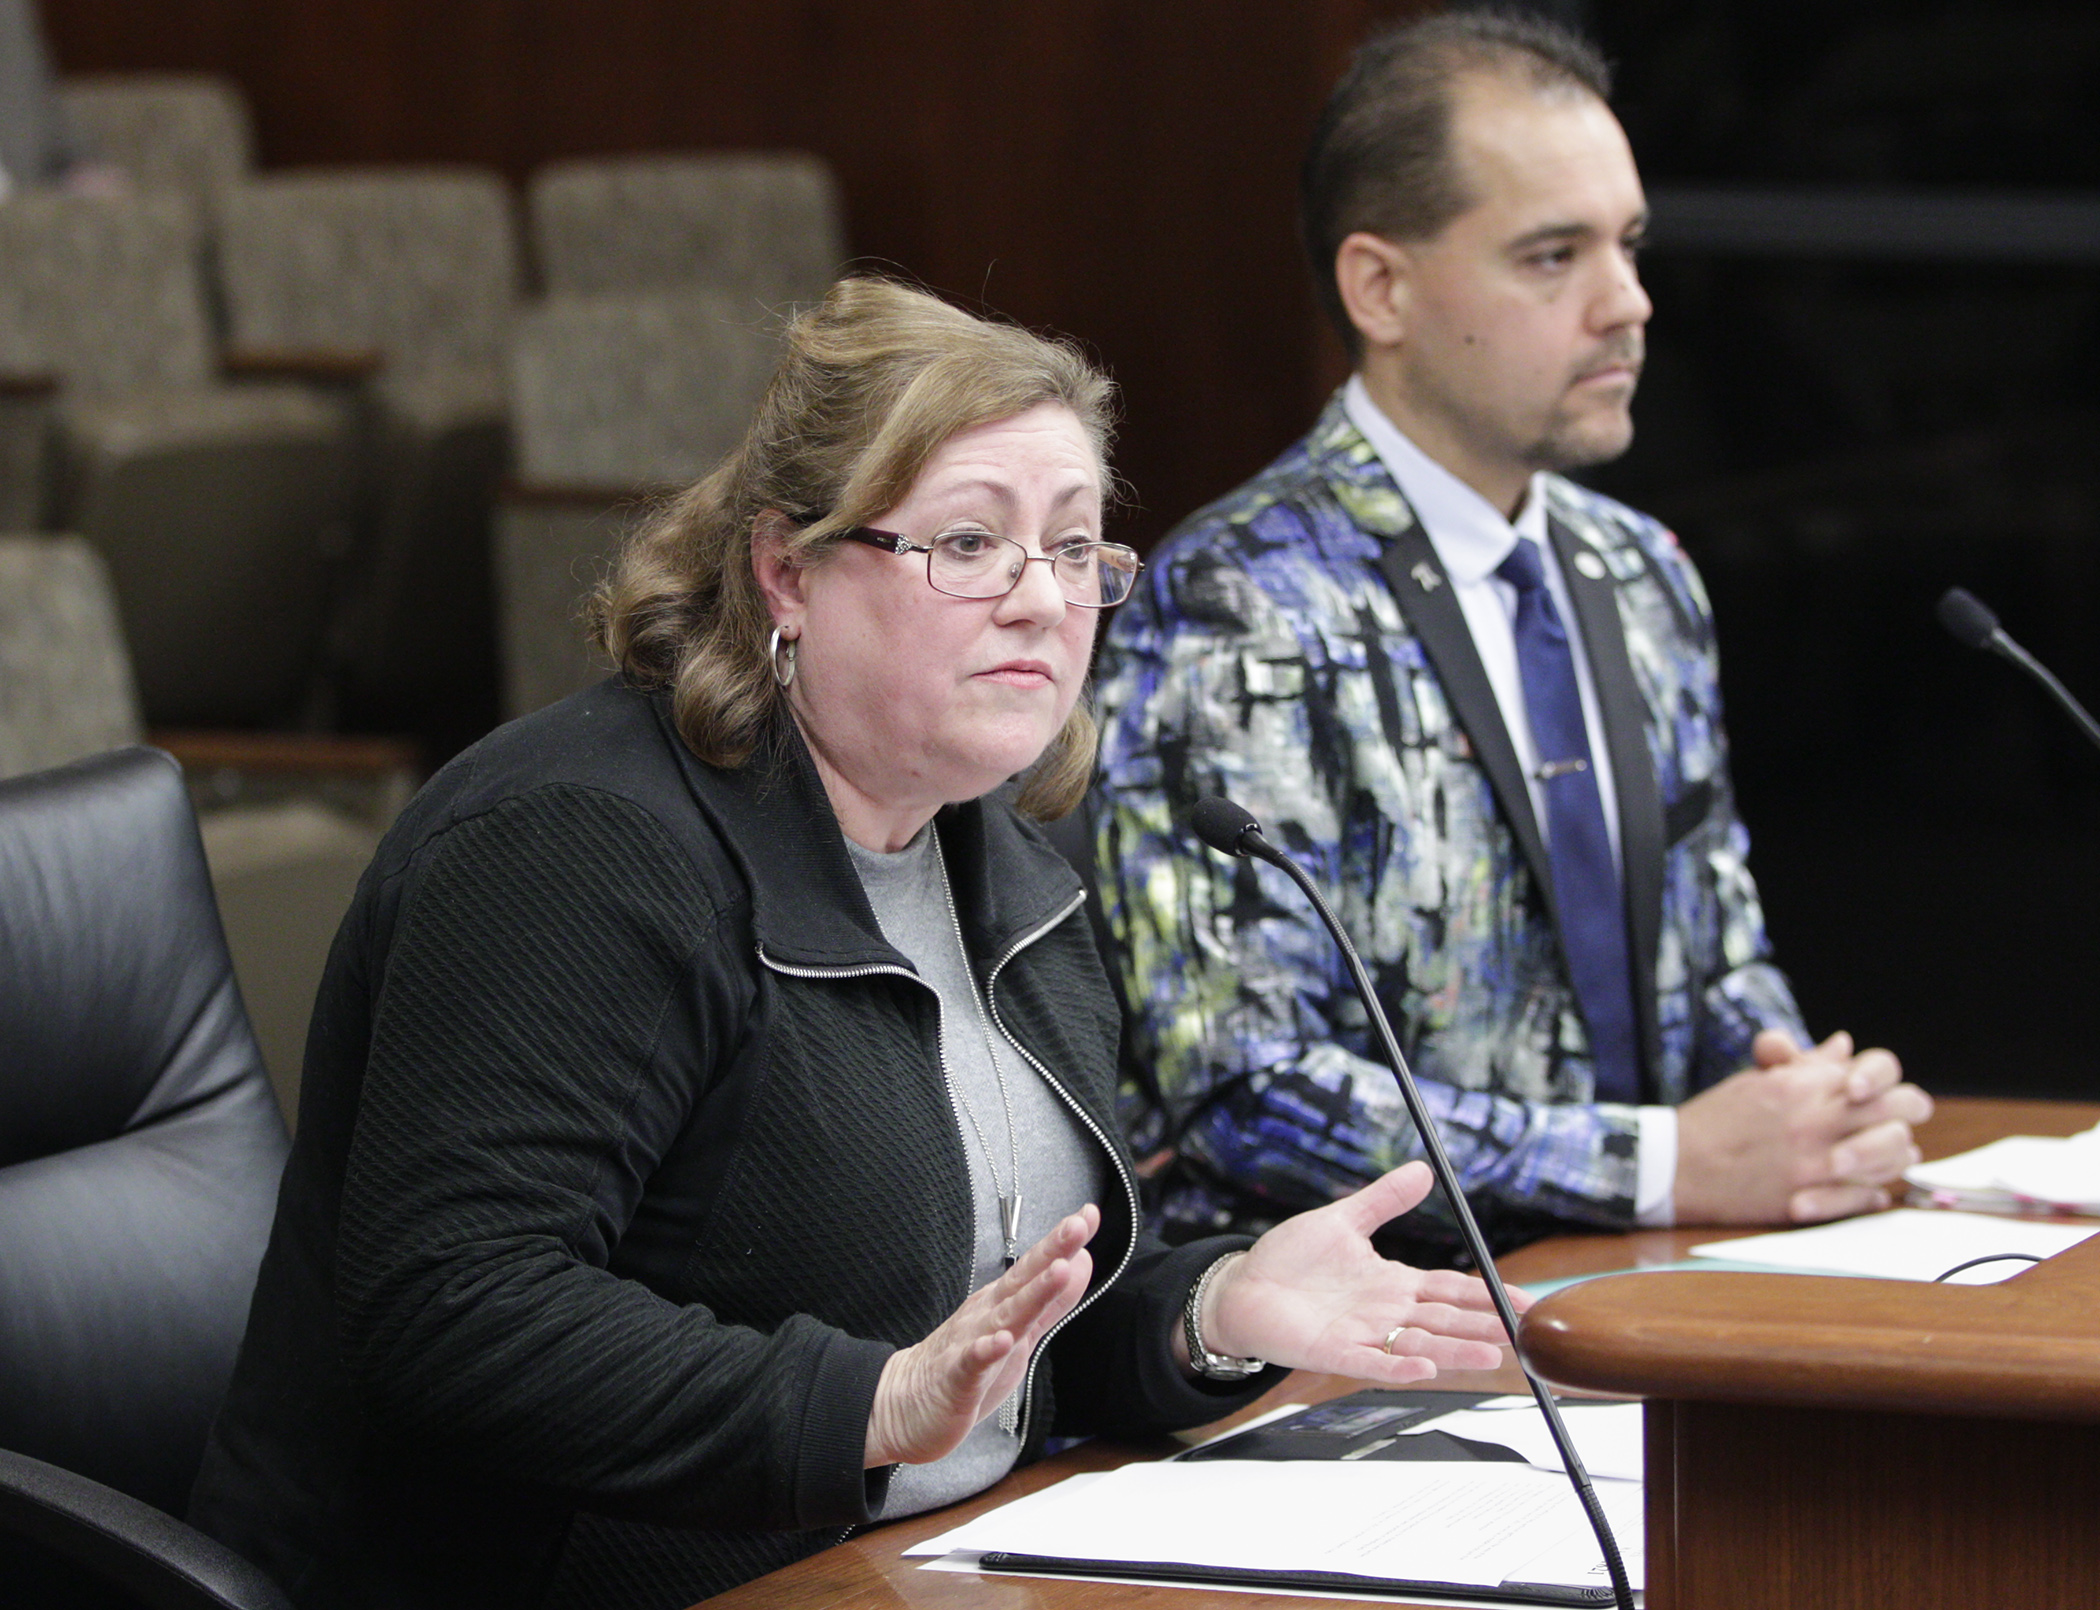 Linda Bell testifies in the House Judiciary Finance and Civil Law Division on HF1821, sponsored by Rep. Eric Lucero, right, which would create the Student Data Privacy Act. Photo by Paul Battaglia